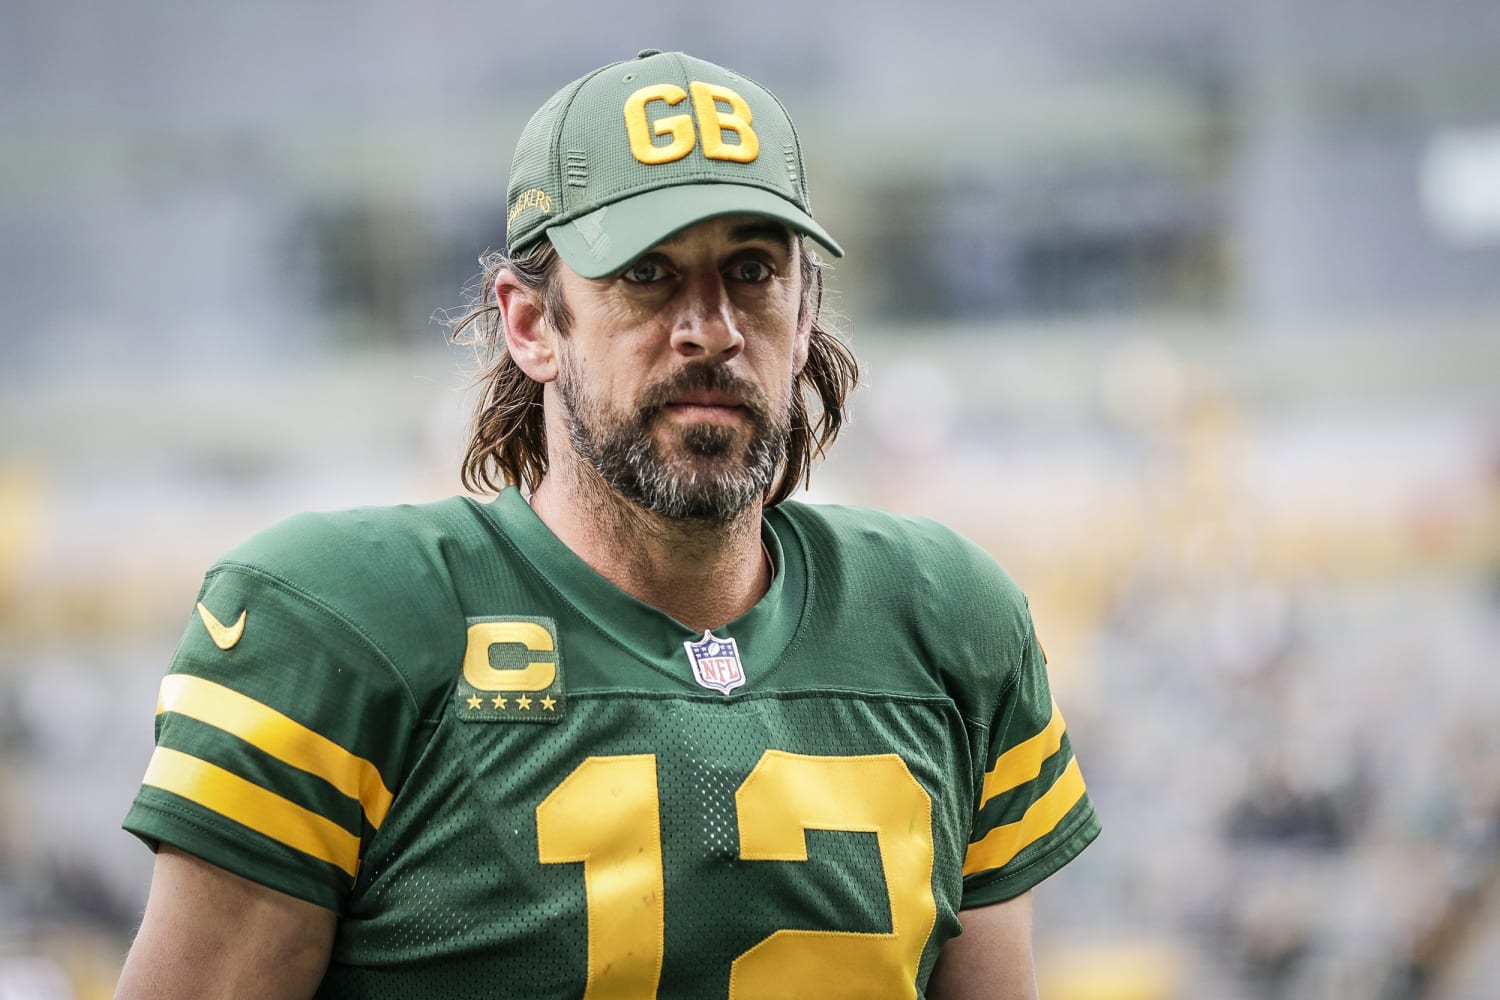 Adam Larson: Aaron Rodgers gets Covid after immunized claim. Homeopathic  remedies don't work.